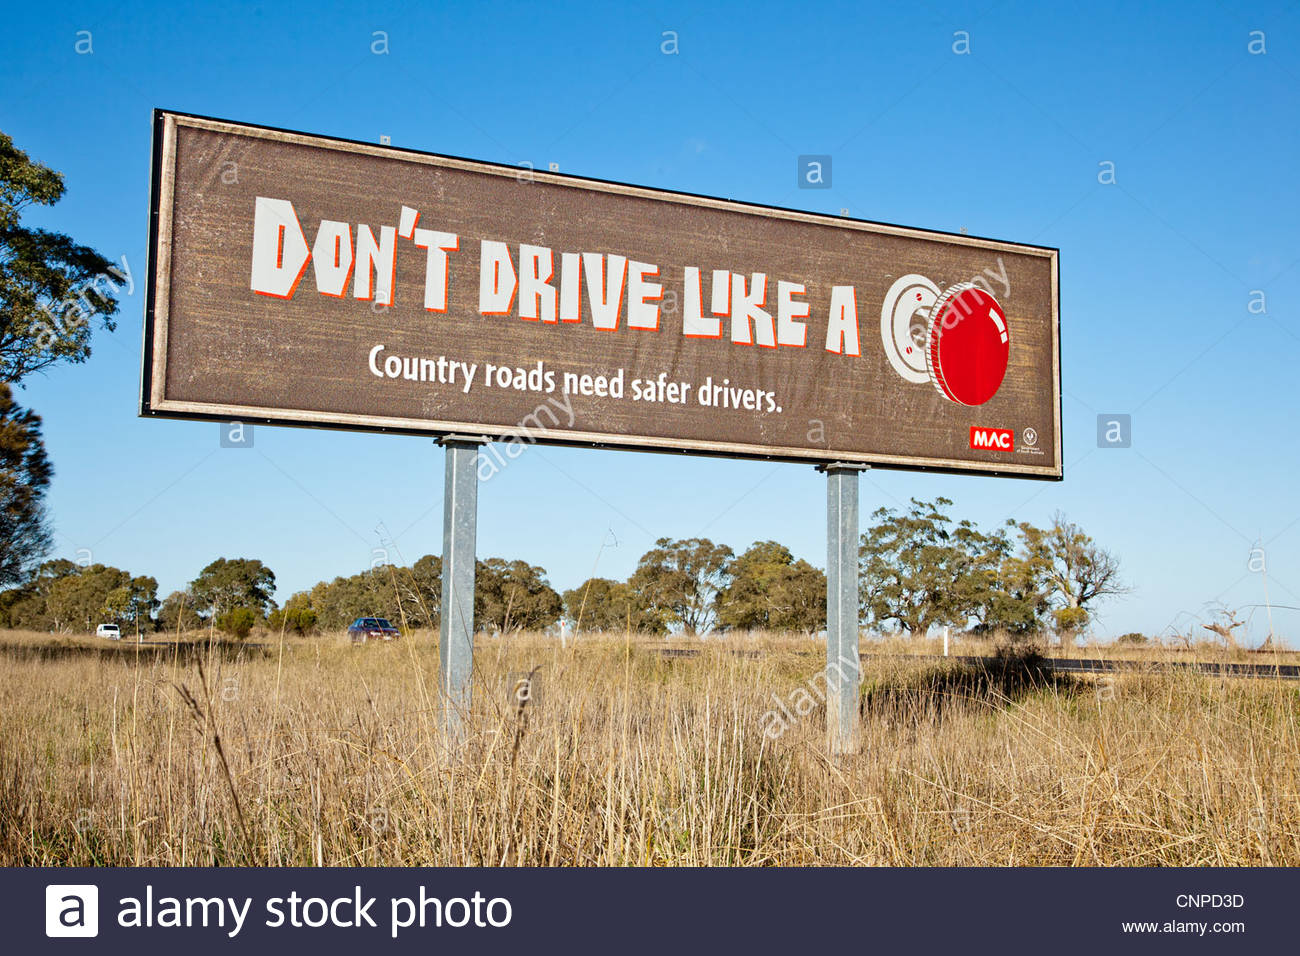 dont-drive-like-a-knob-warning-sign-mount-gambier-south-australia-CNPD3D.jpg